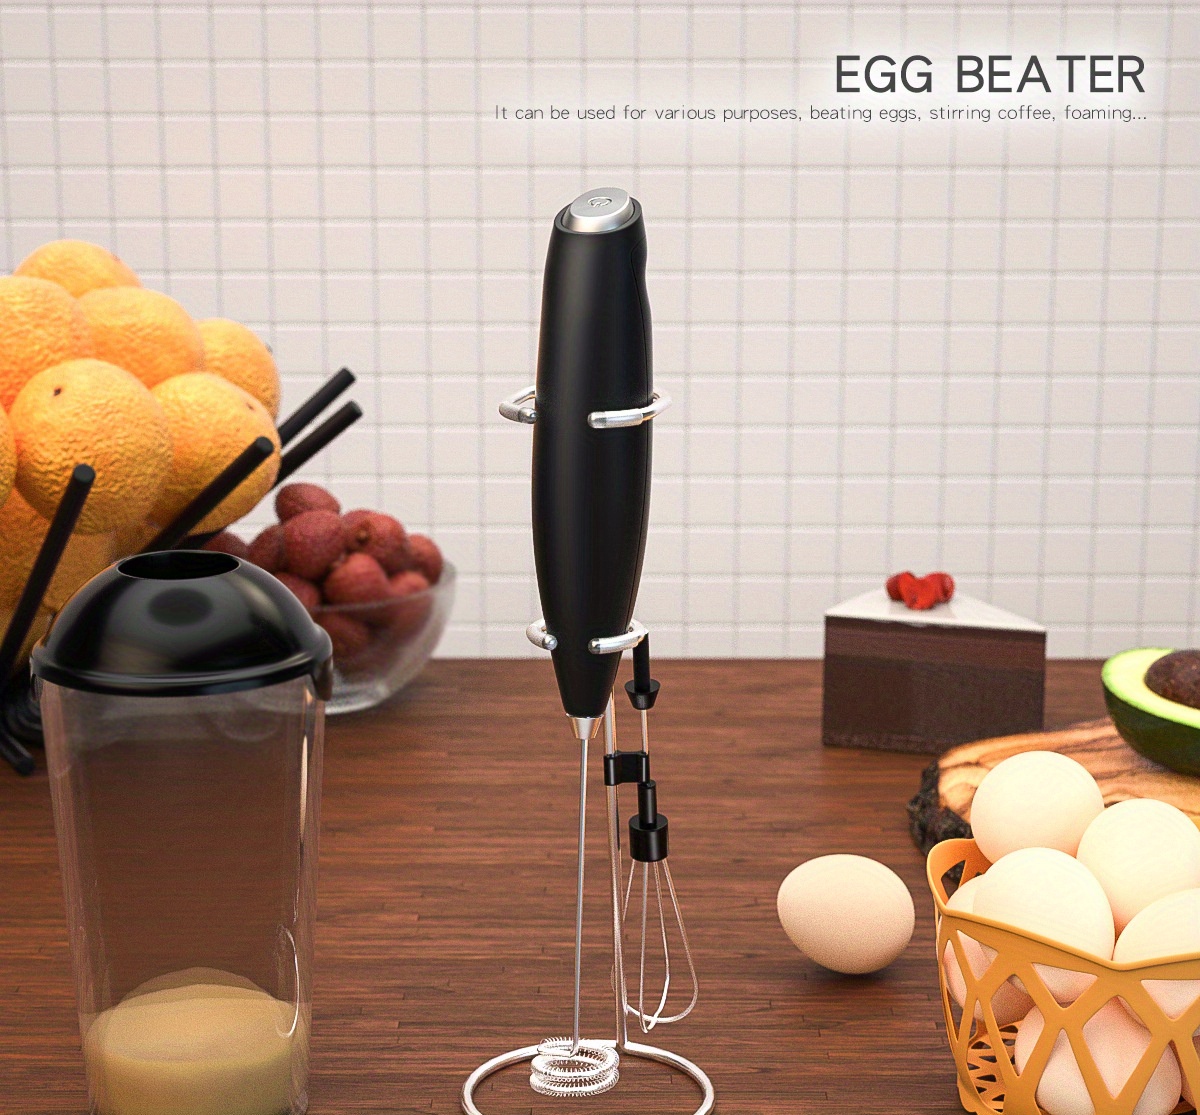 Make perfect at-home cappuccinos with this handheld milk frother